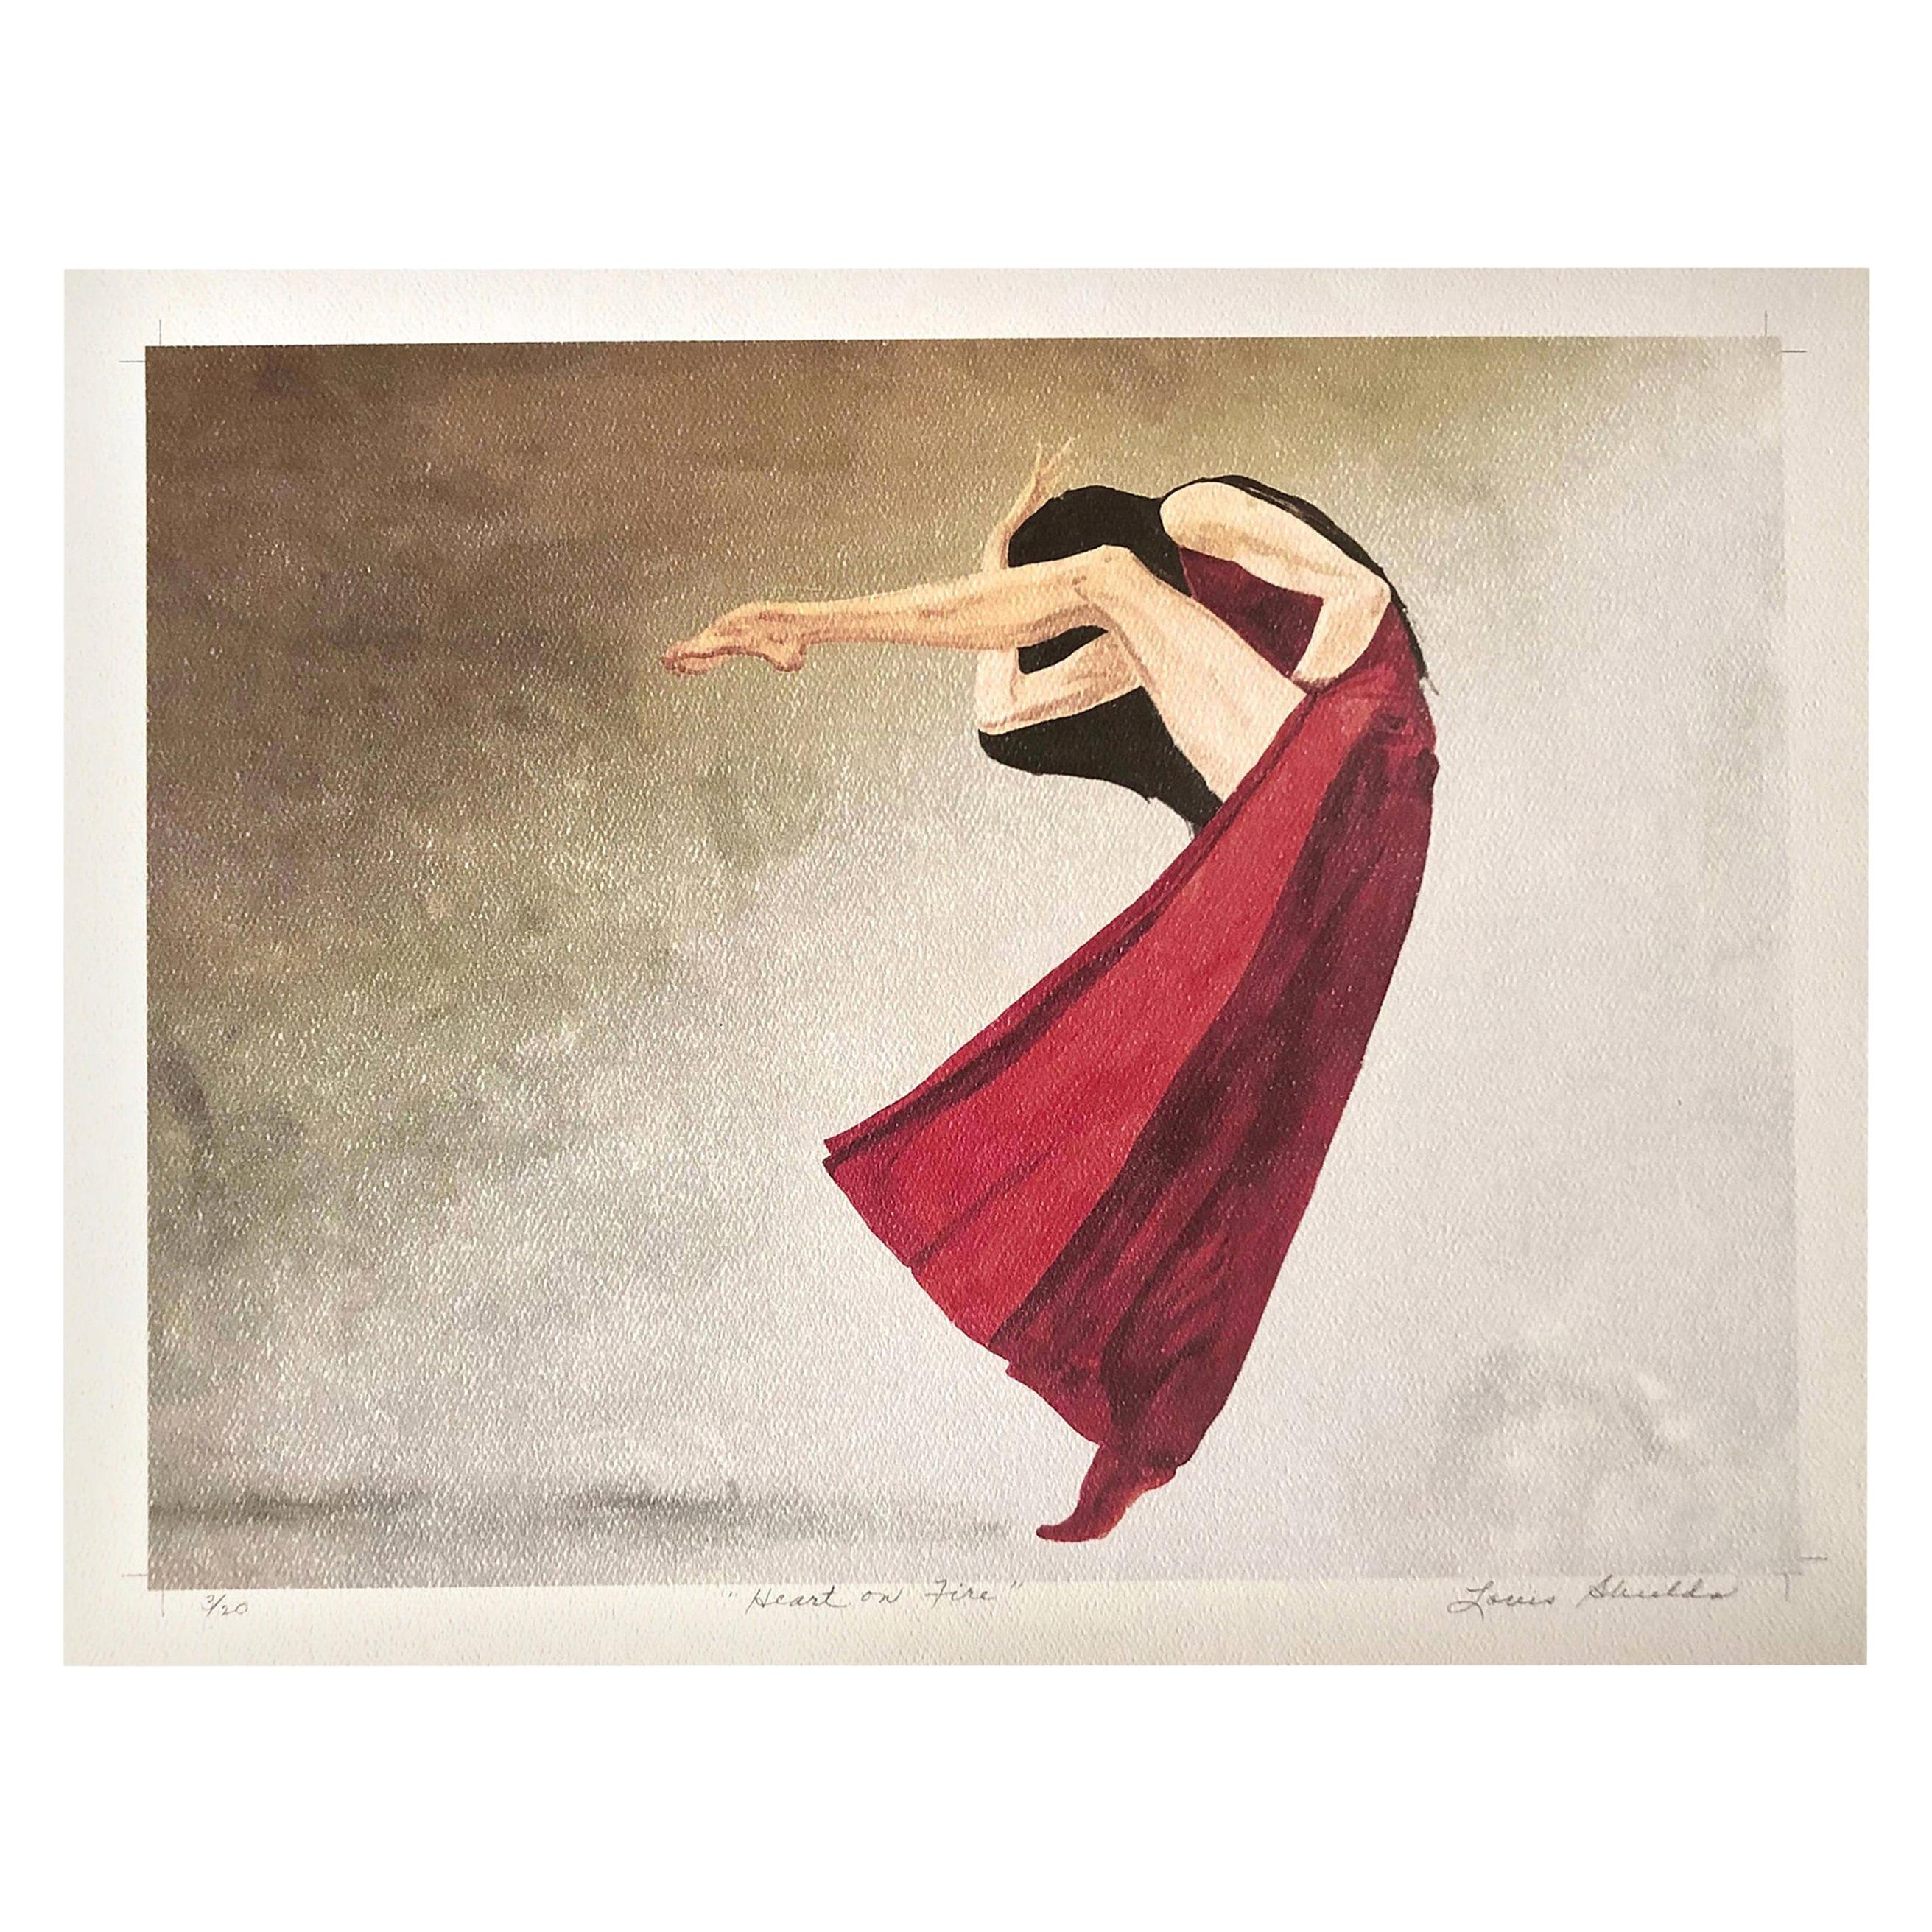 "Heart on Fire" Figurative Archival Print on Textured Watercolor Paper For Sale